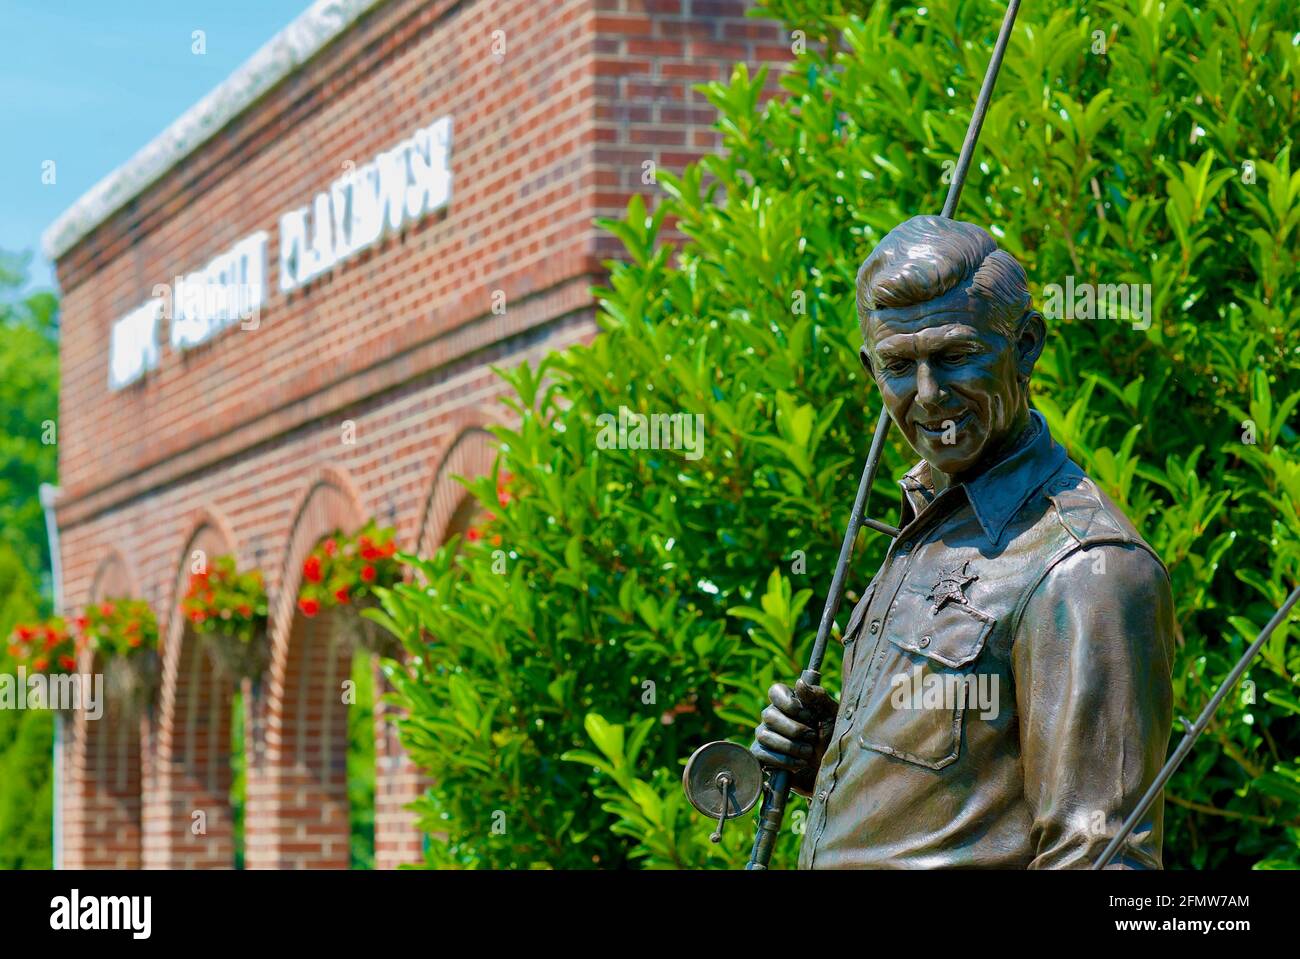 Mount Airy, North Carolina, USA - July 5, 2020: Close-up of a bronze statue of 'Sheriff Andy' of the popular 'The Andy Griffith Show' television show. Stock Photo